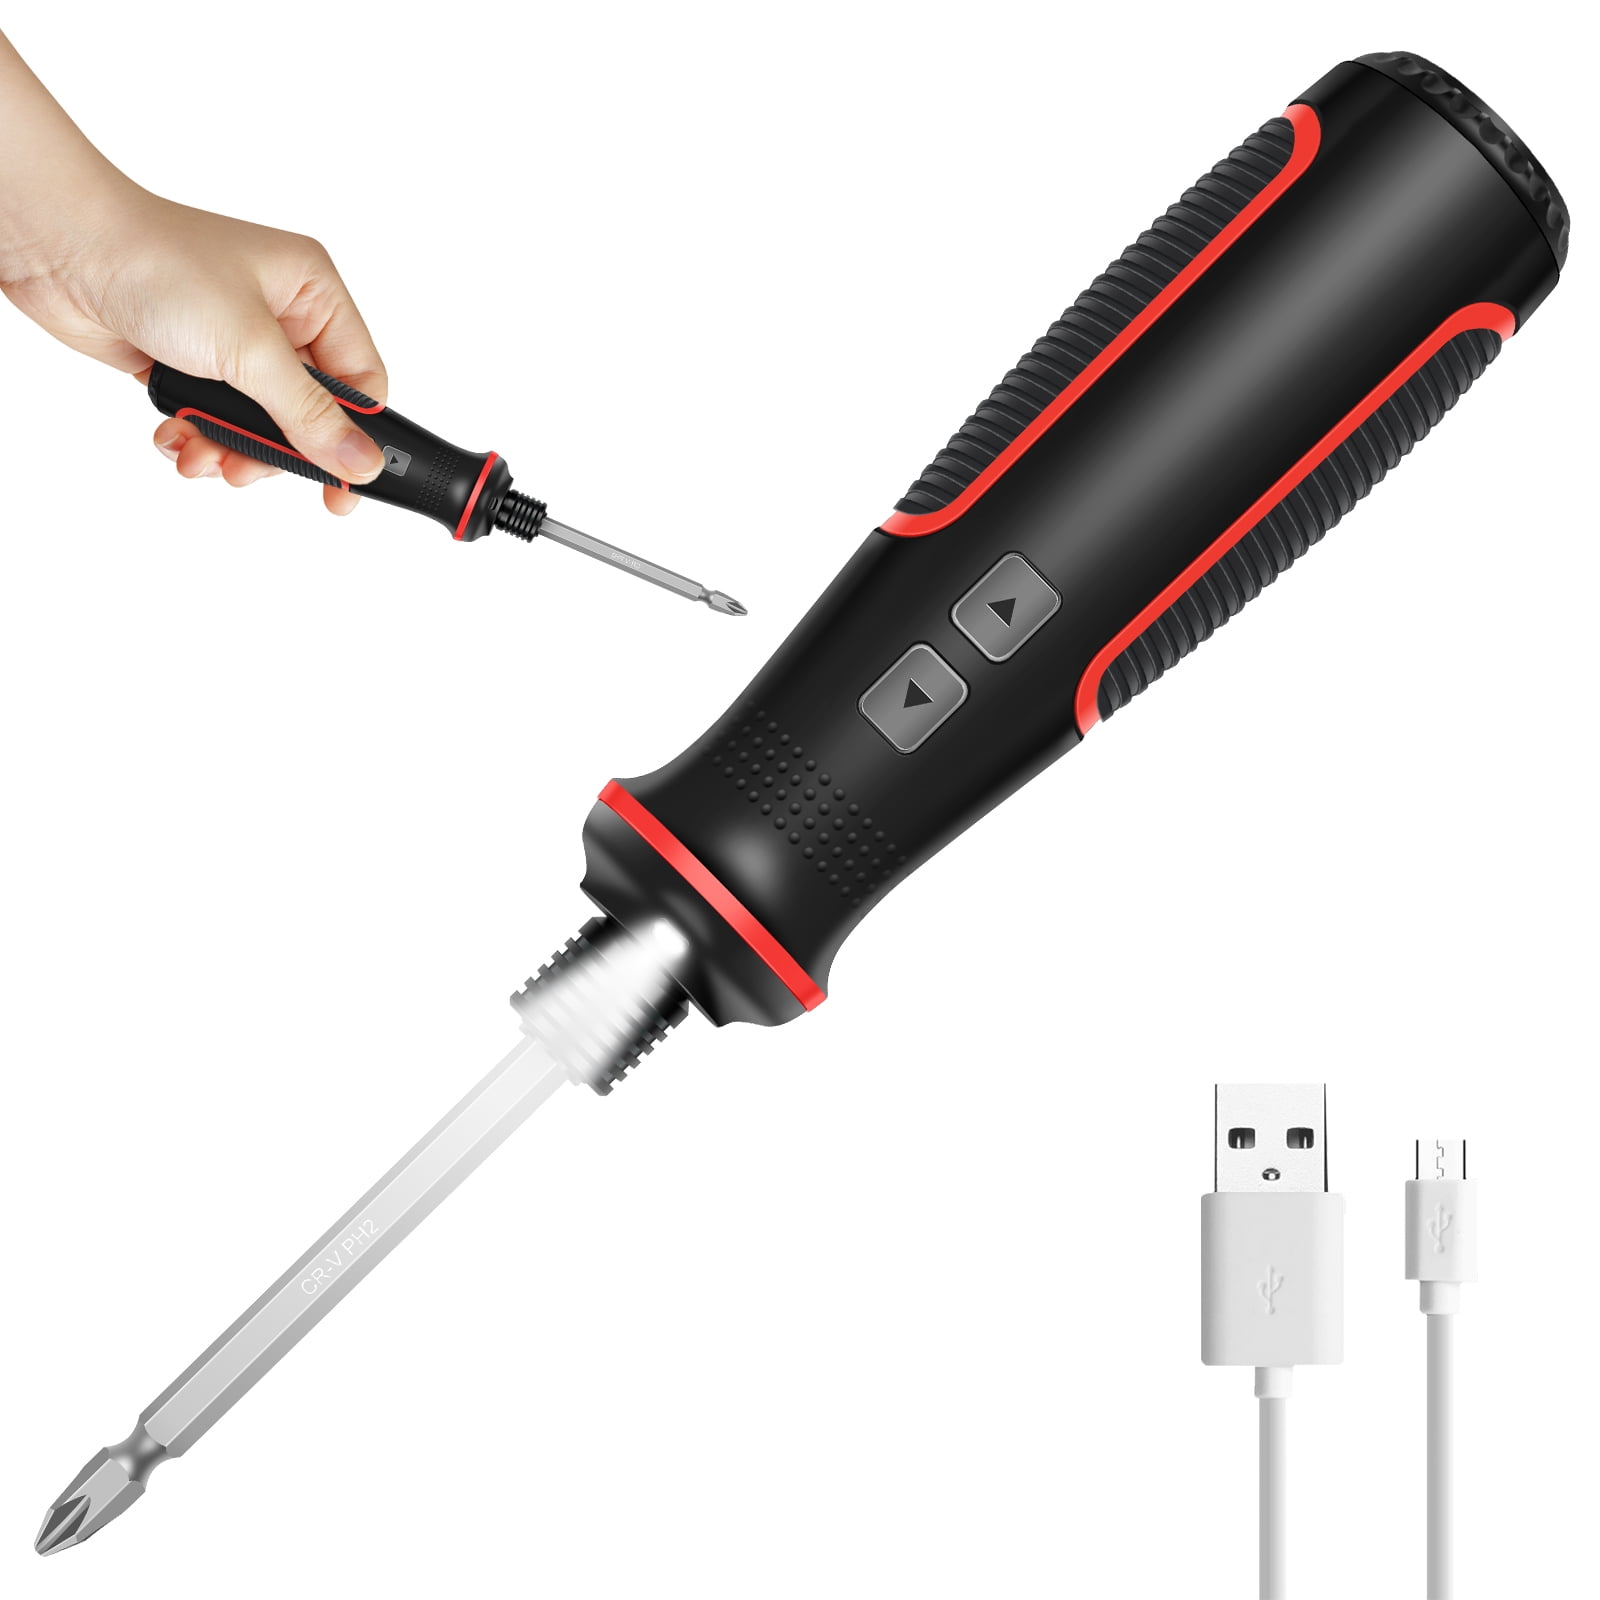 SHENGXINY Household Tools Clearance Electric Screwdriver Set Rechargeable  3.6V Cordless Screwdriver Kit With 15Pcs Accessories, 2 Position Handle  With Led Light 